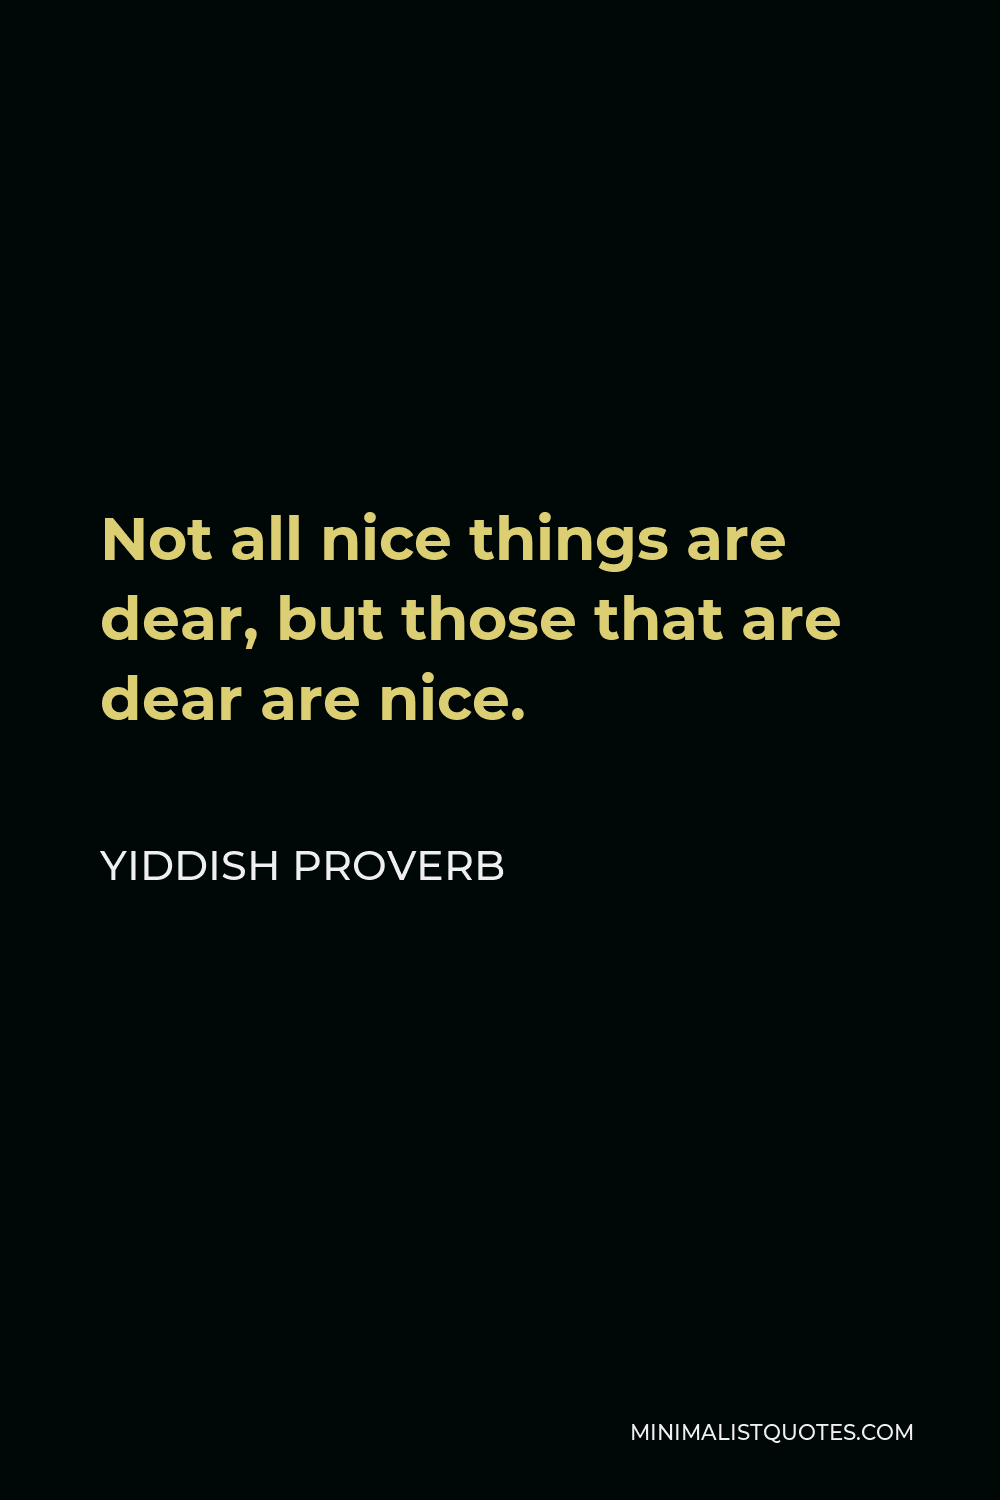 Yiddish Proverb Quote - Not all nice things are dear, but those that are dear are nice.